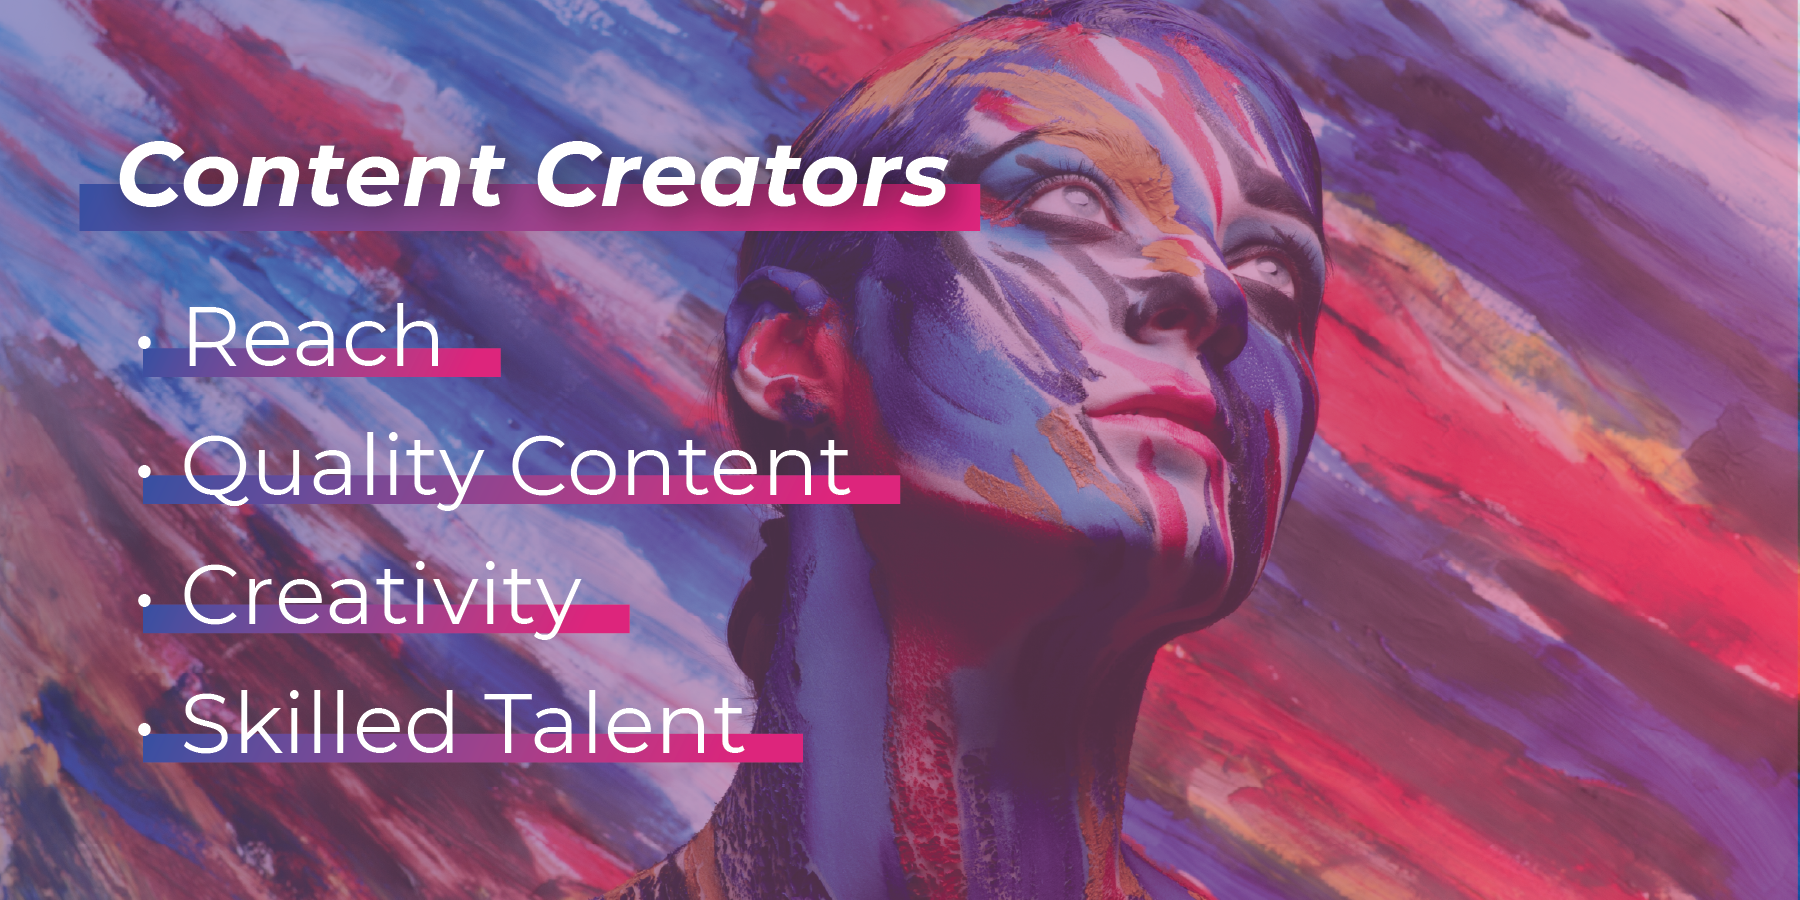 The continued rise of specialty content creation- brands having a deeper understanding and appreciation for an influencers skill set as a creator- and strategically tapping into that content creation and creativity for scroll-stopping campaigns (ie. illustrators, designers, videographers, etc.)